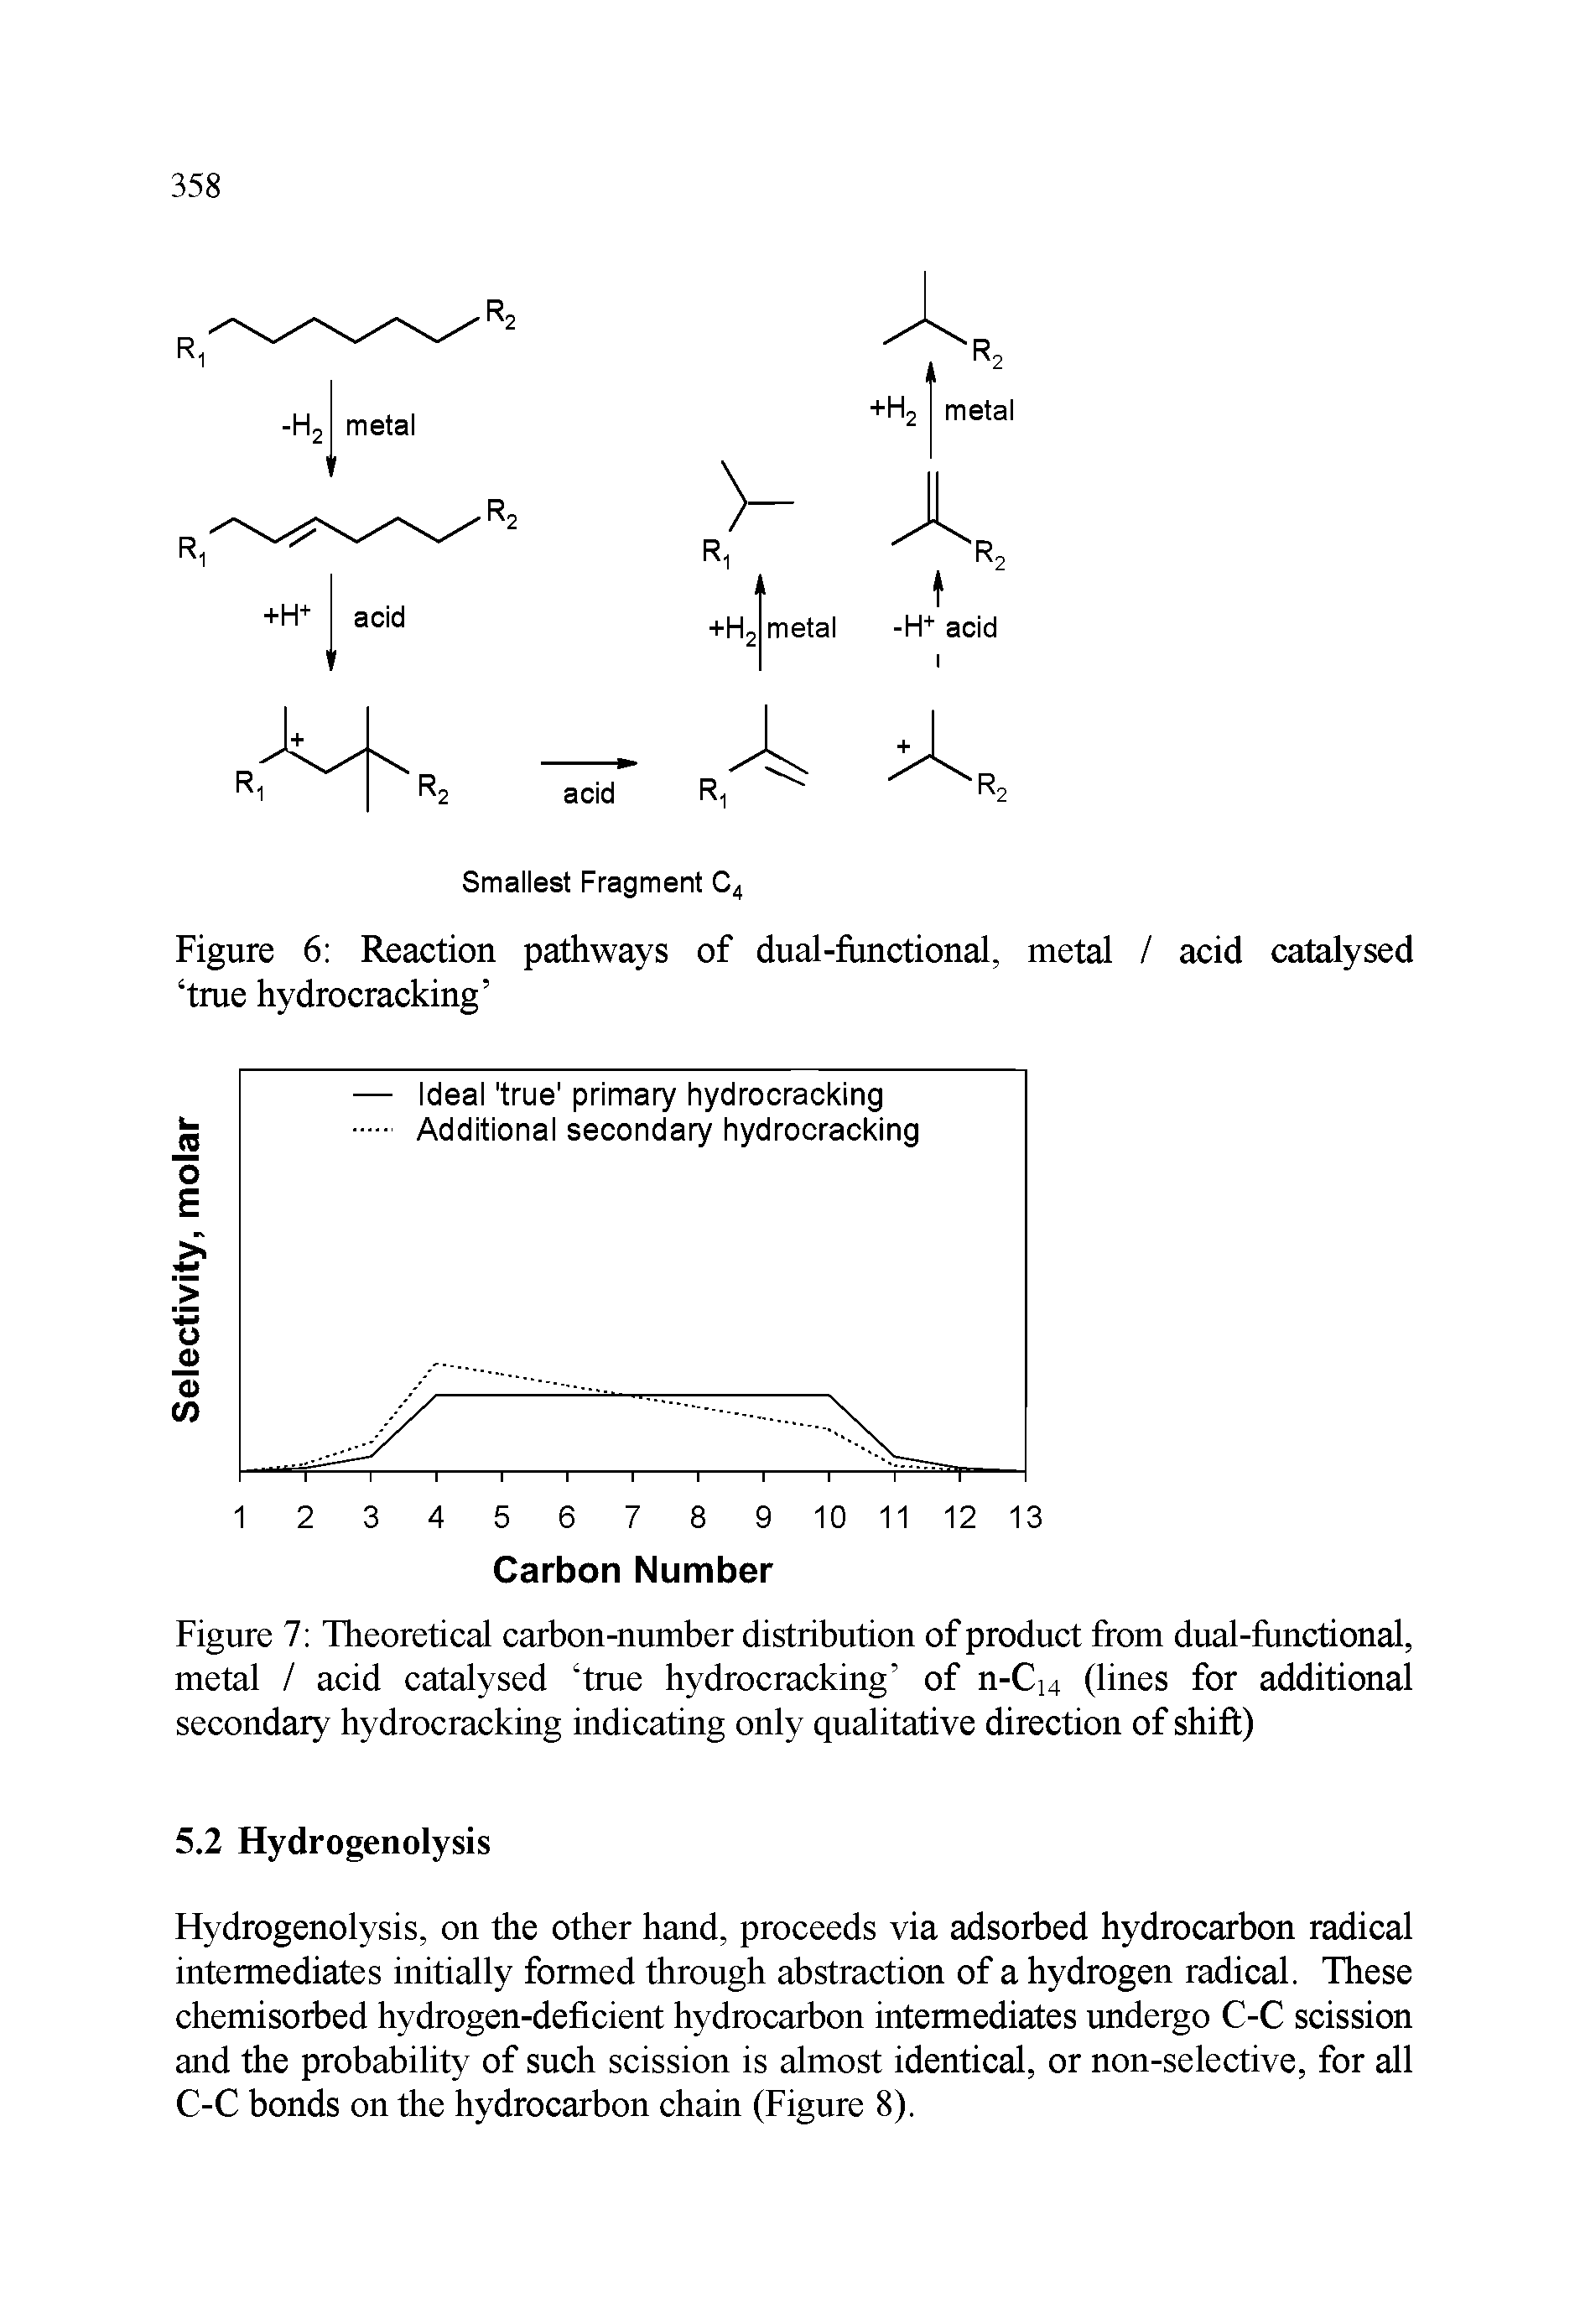 Figure 7 Theoretical carbon-number distribution of product from dual-functional, metal / acid catalysed true hydrocracking of n-Ci4 (lines for additional secondary hydrocracking indicating only qualitative direction of shift)...